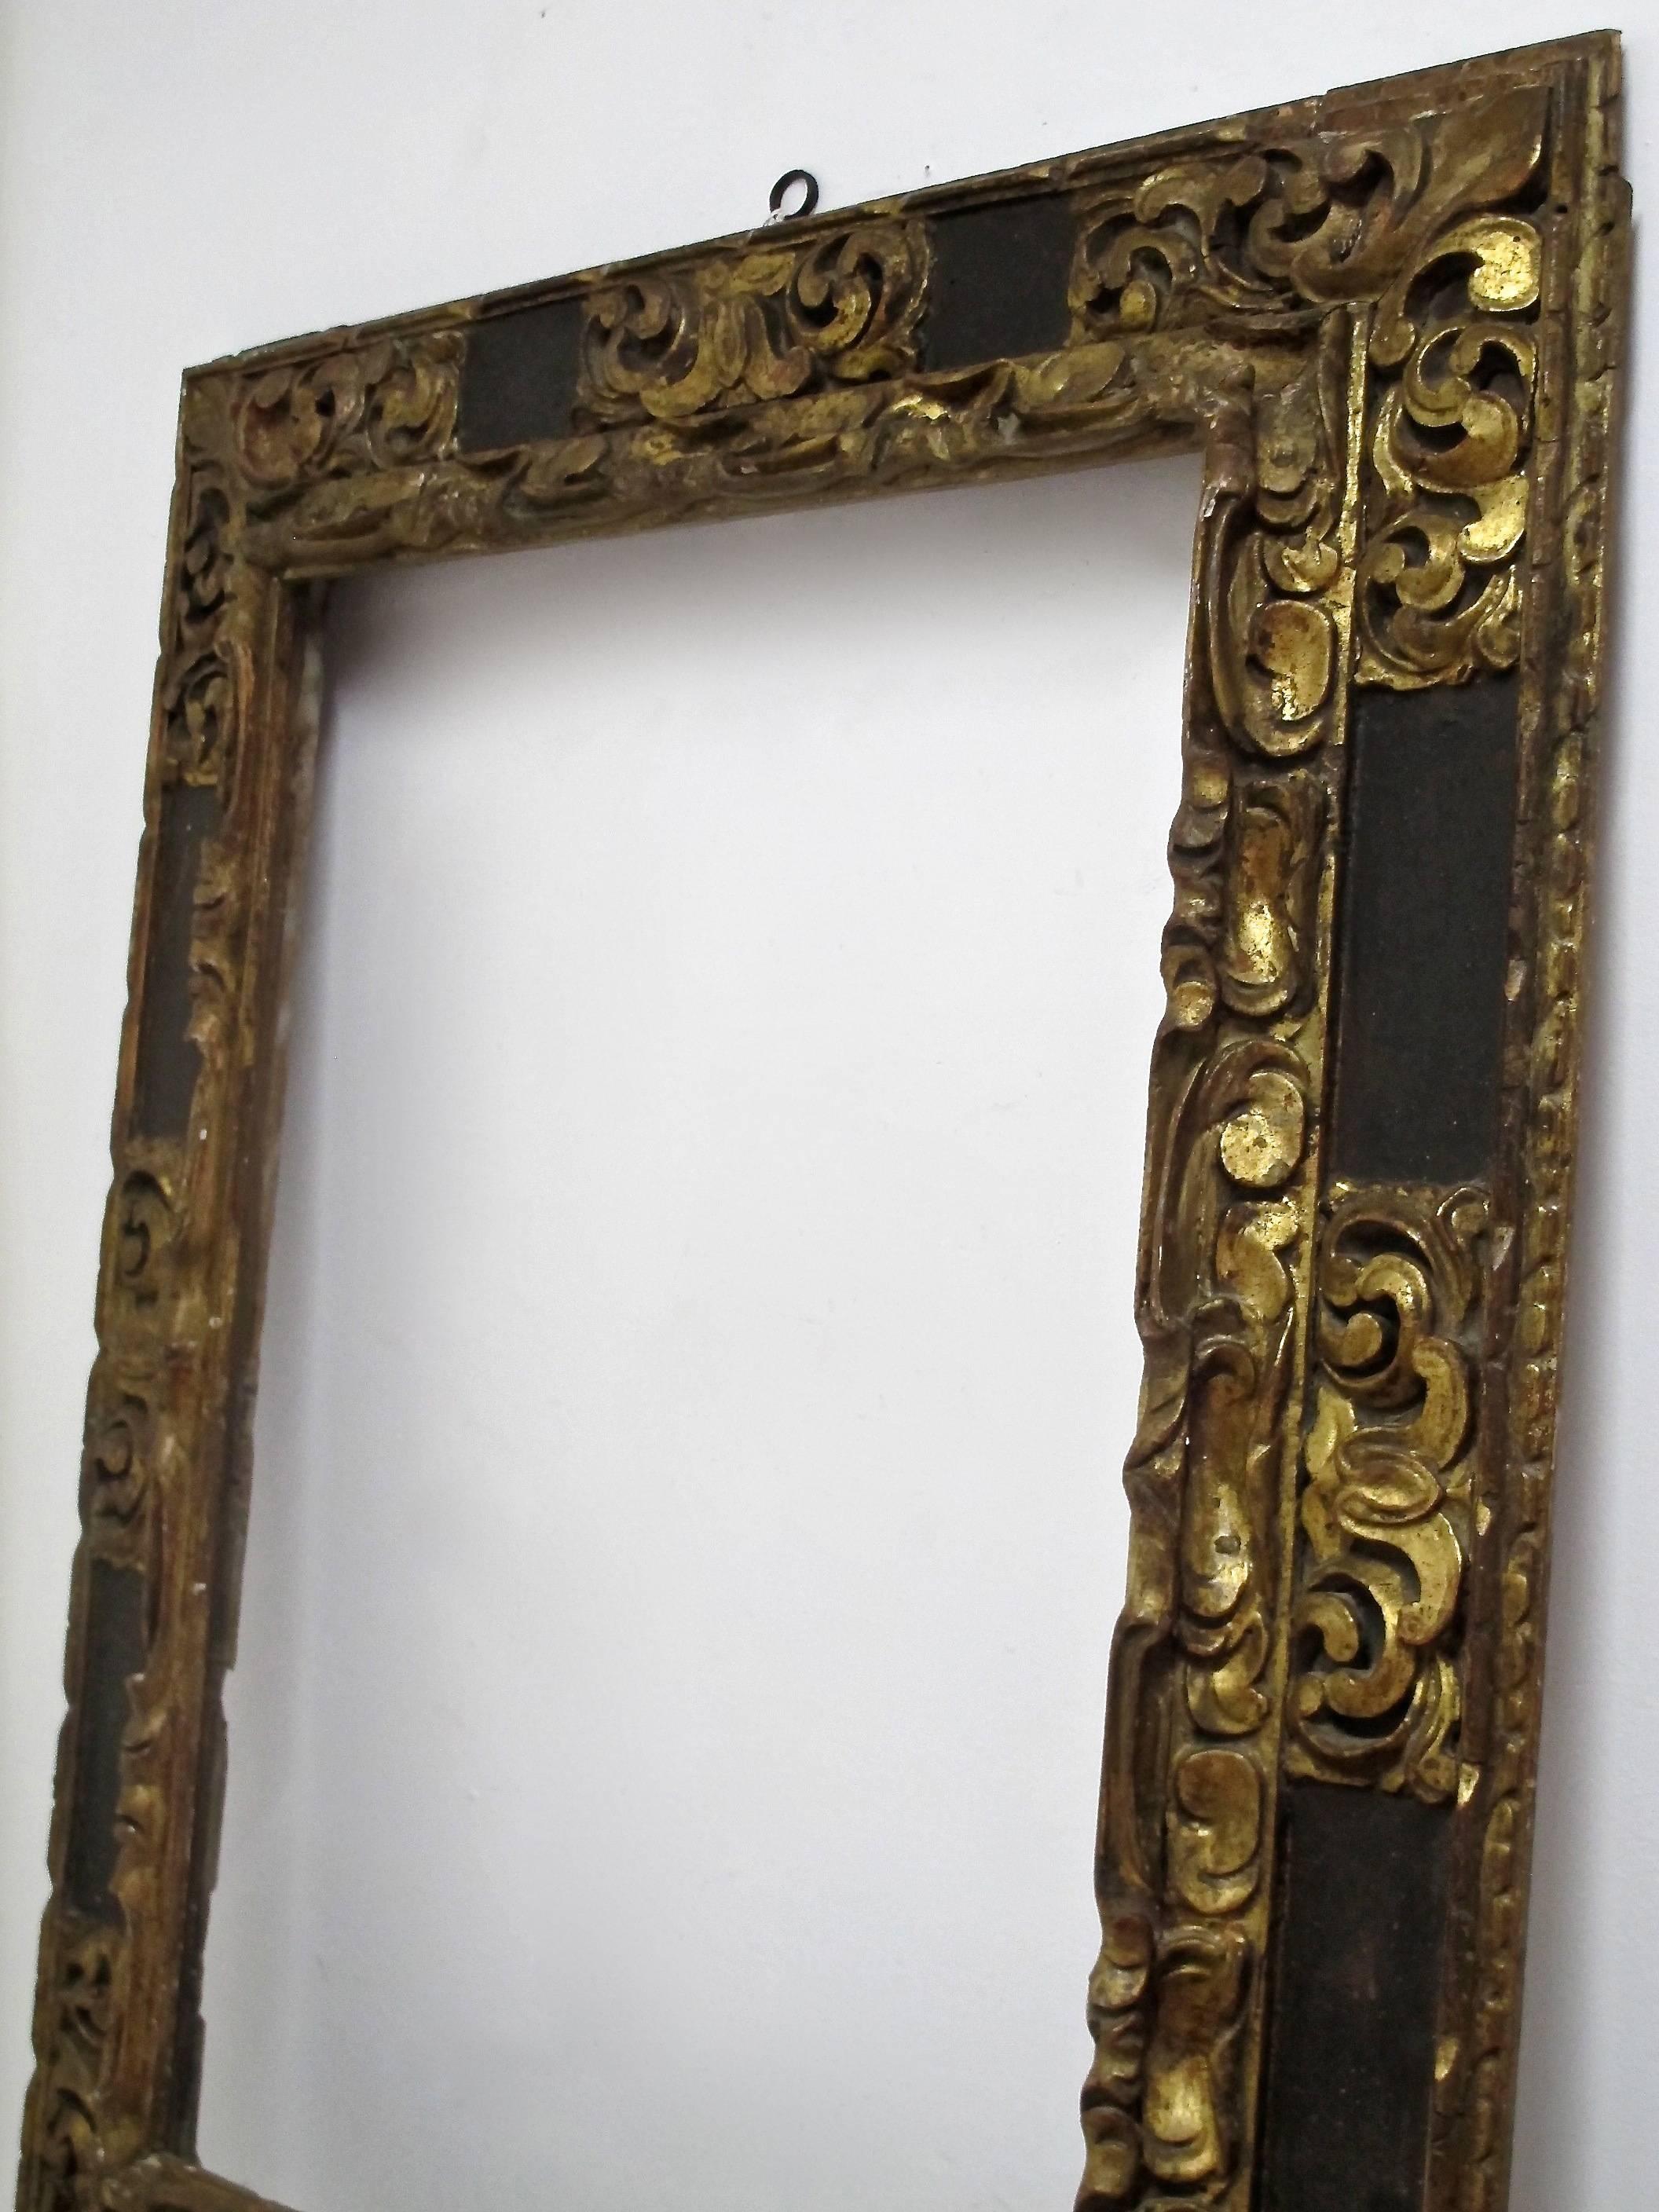 A truly extraordinary large carved, painted and gilded Spanish Colonial painting frame in original condition. The inside measurements on the frame are 33.5 X 25. Spain, 18th century.